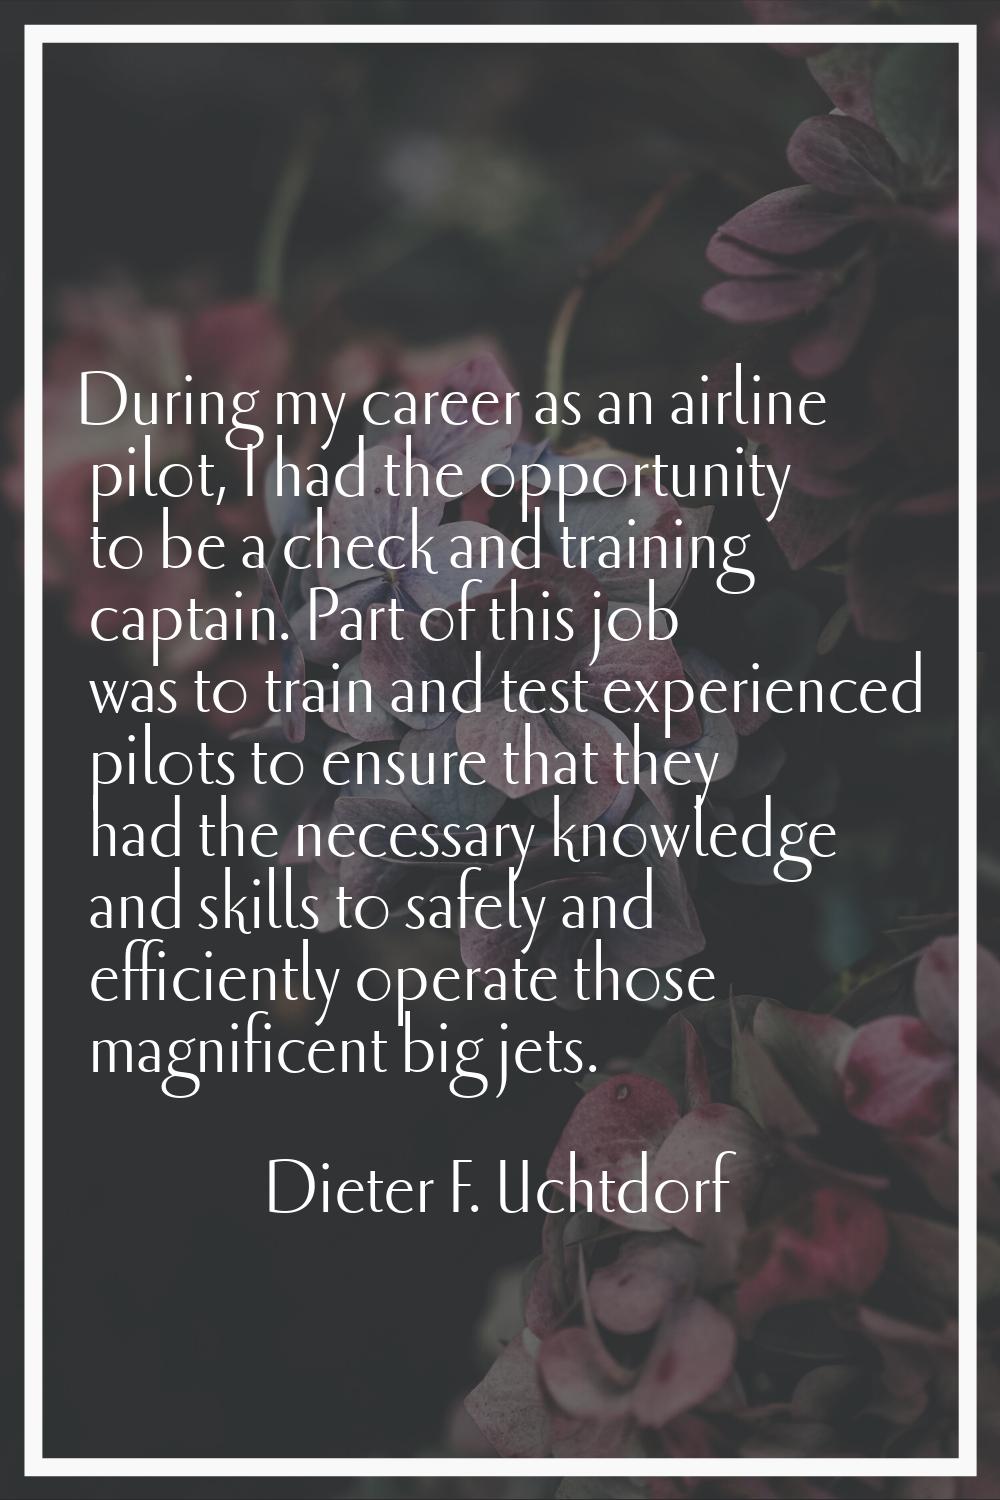 During my career as an airline pilot, I had the opportunity to be a check and training captain. Par